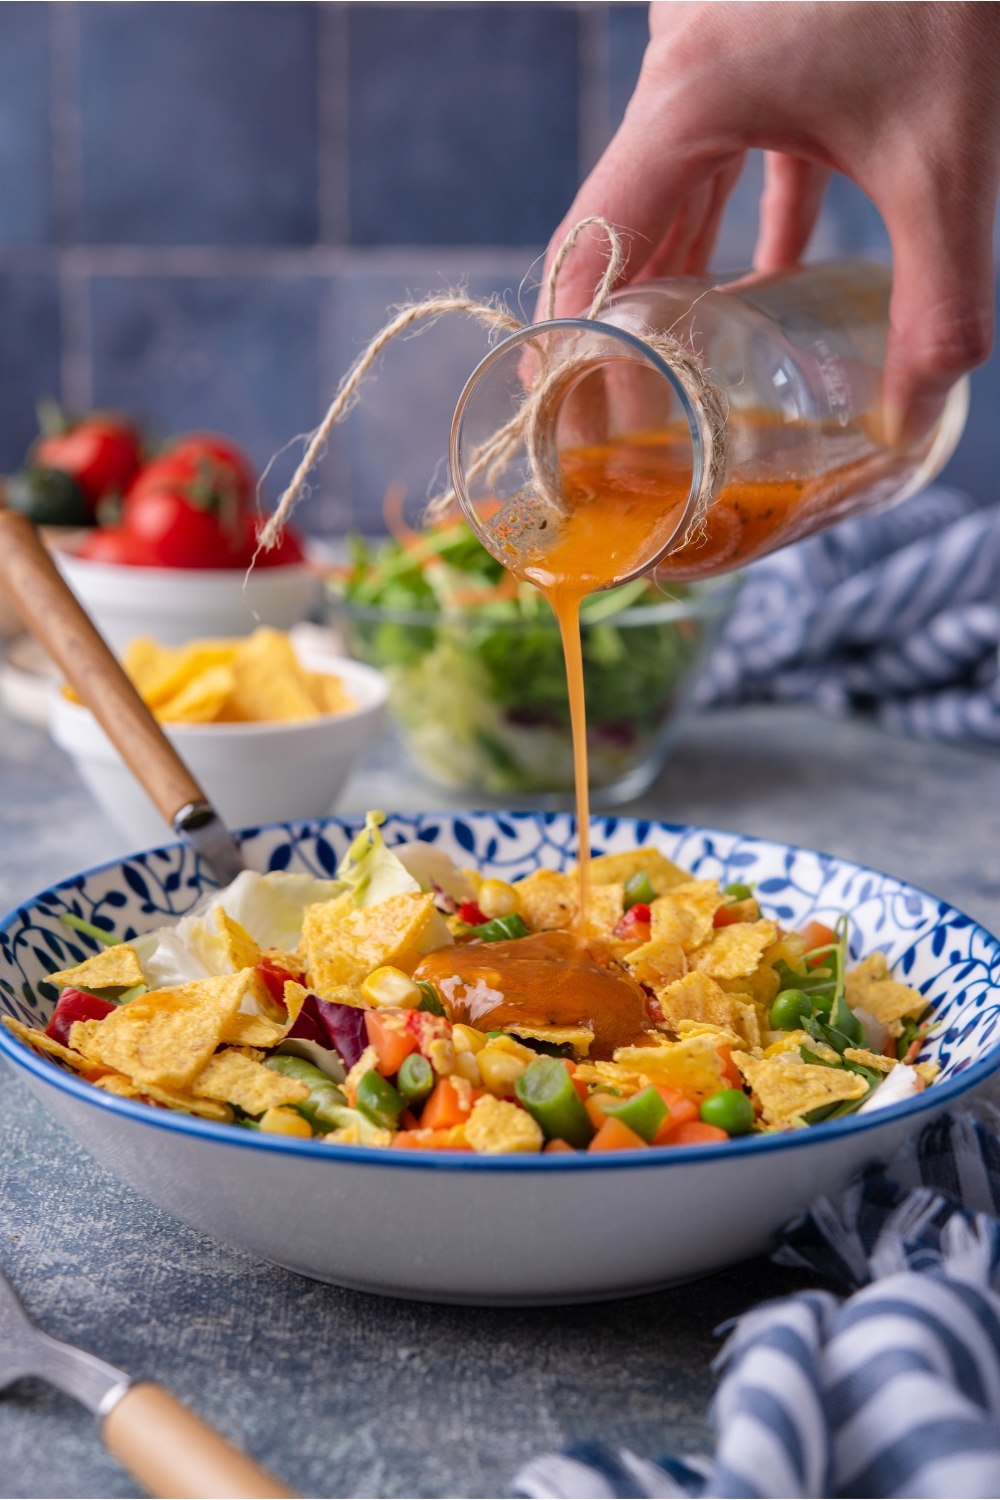 Hand drizzling vinaigrette over a salad of lettuce, tortilla chips, and assorted veggies.